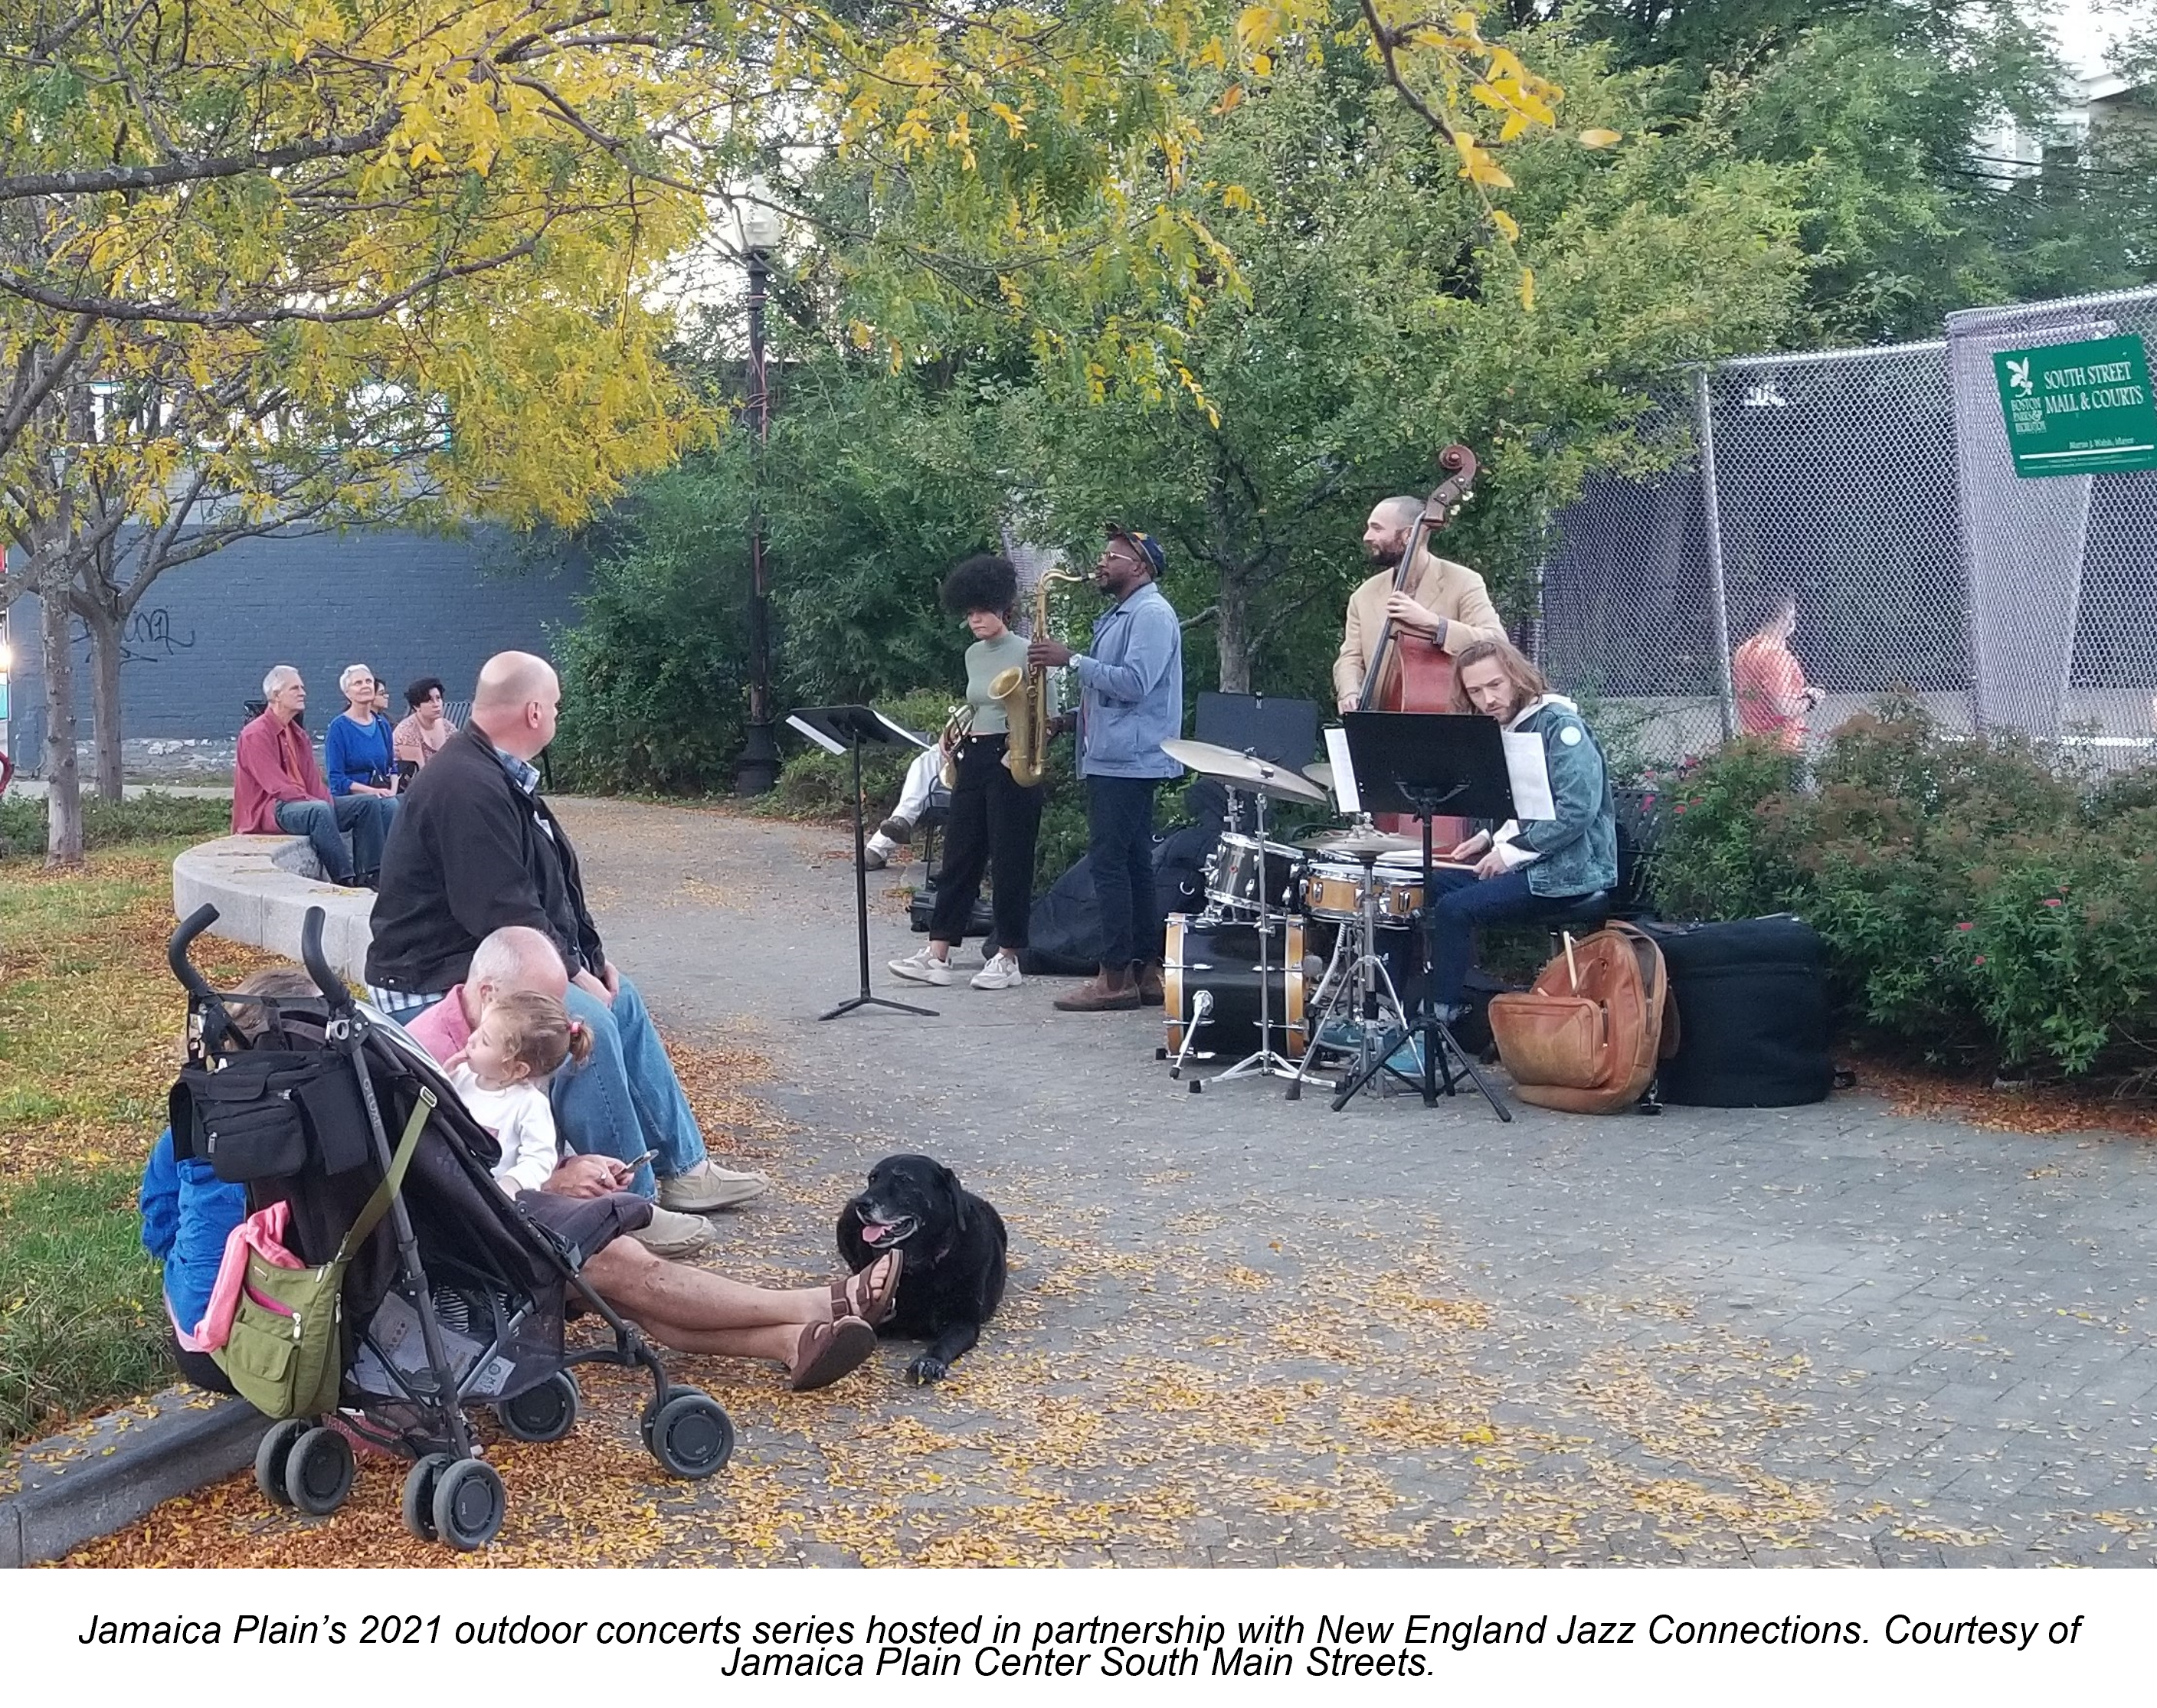 Jamaica Plain’s 2021 outdoor concerts series hosted in partnership with New England Jazz Connections. Courtesy of Jamaica Plain Center South Main Streets.